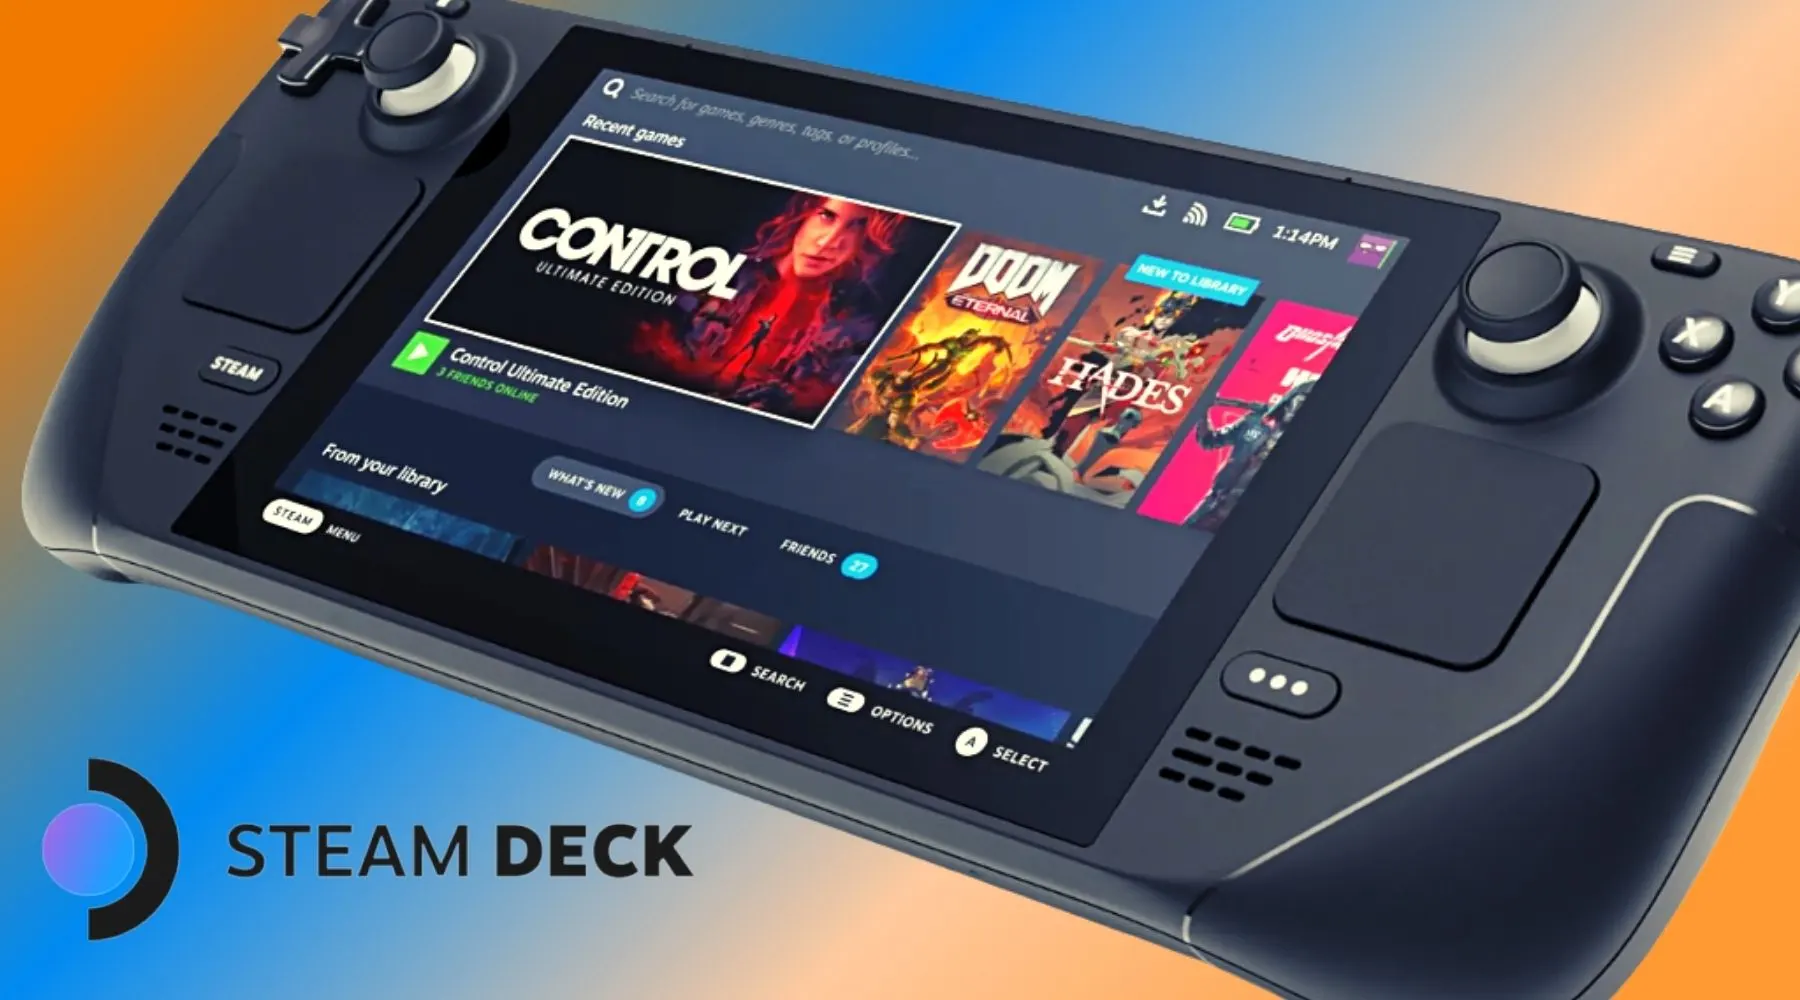 How to buy a Steam Deck in Australia, and what the risks are ahead